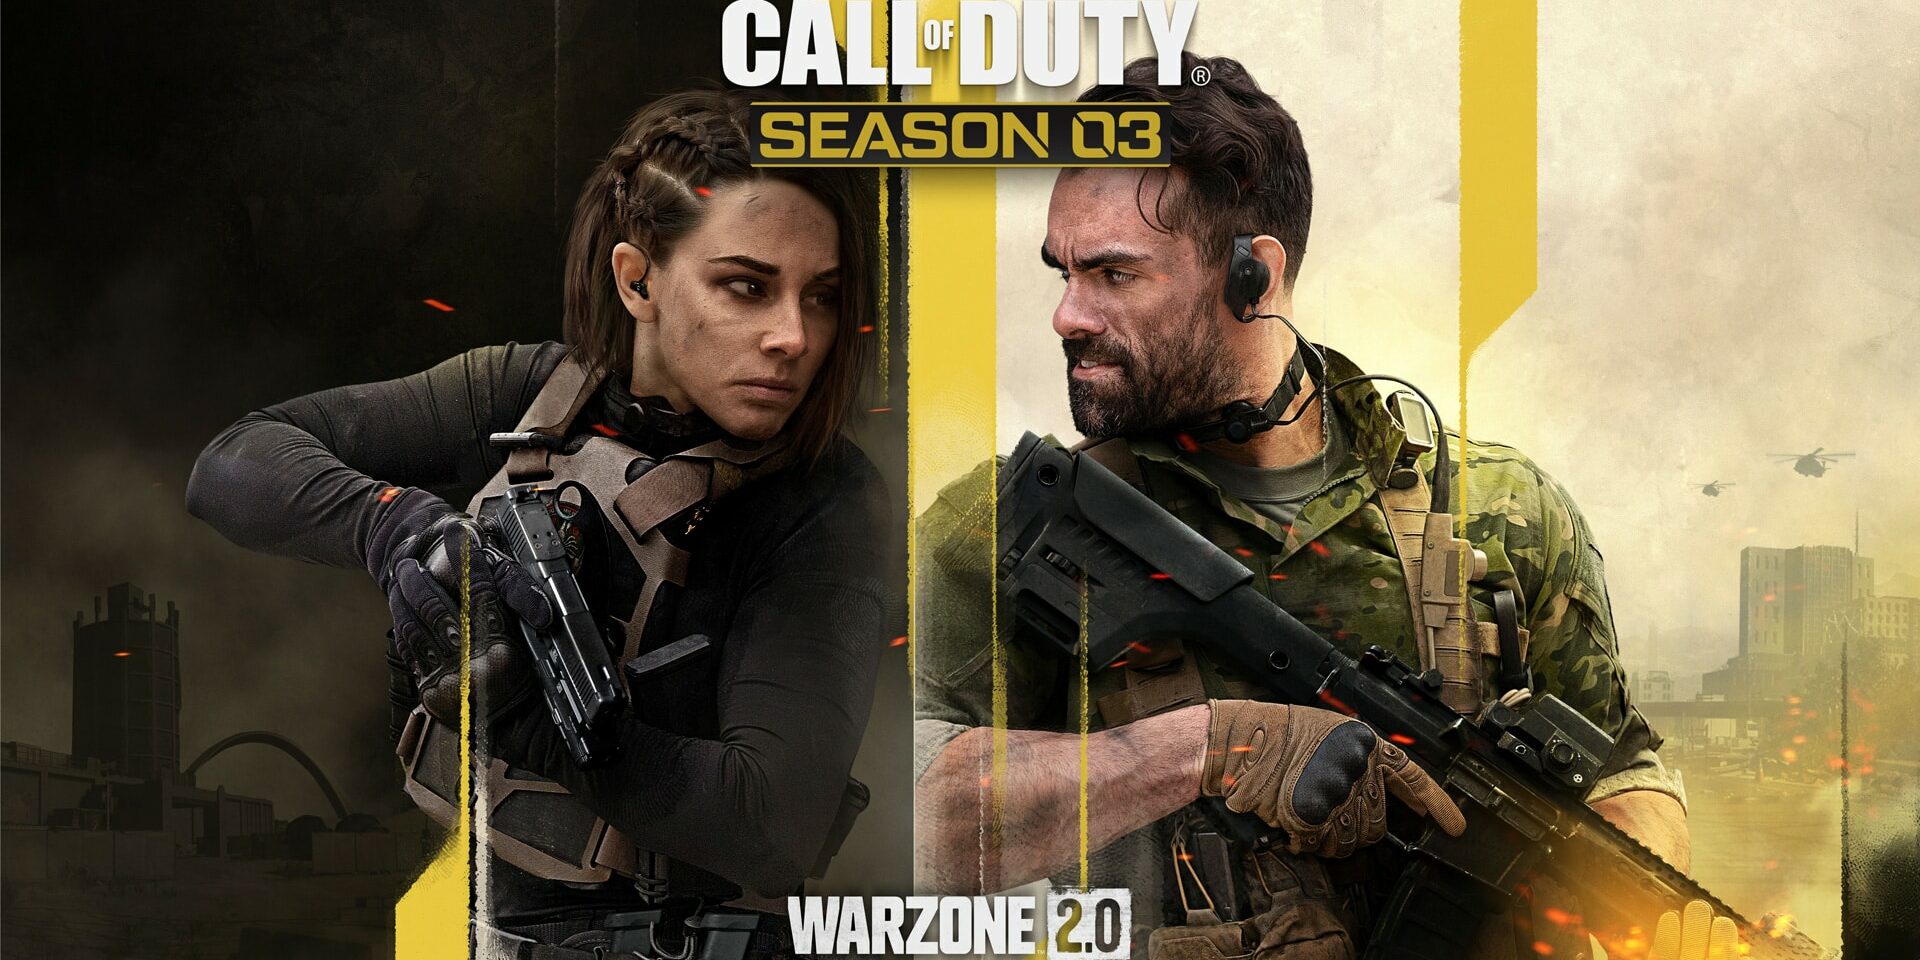 Modern Warfare 2 and Warzone 2 Update 1.17 Released for Season 3 This April  12, Patch Notes Listed